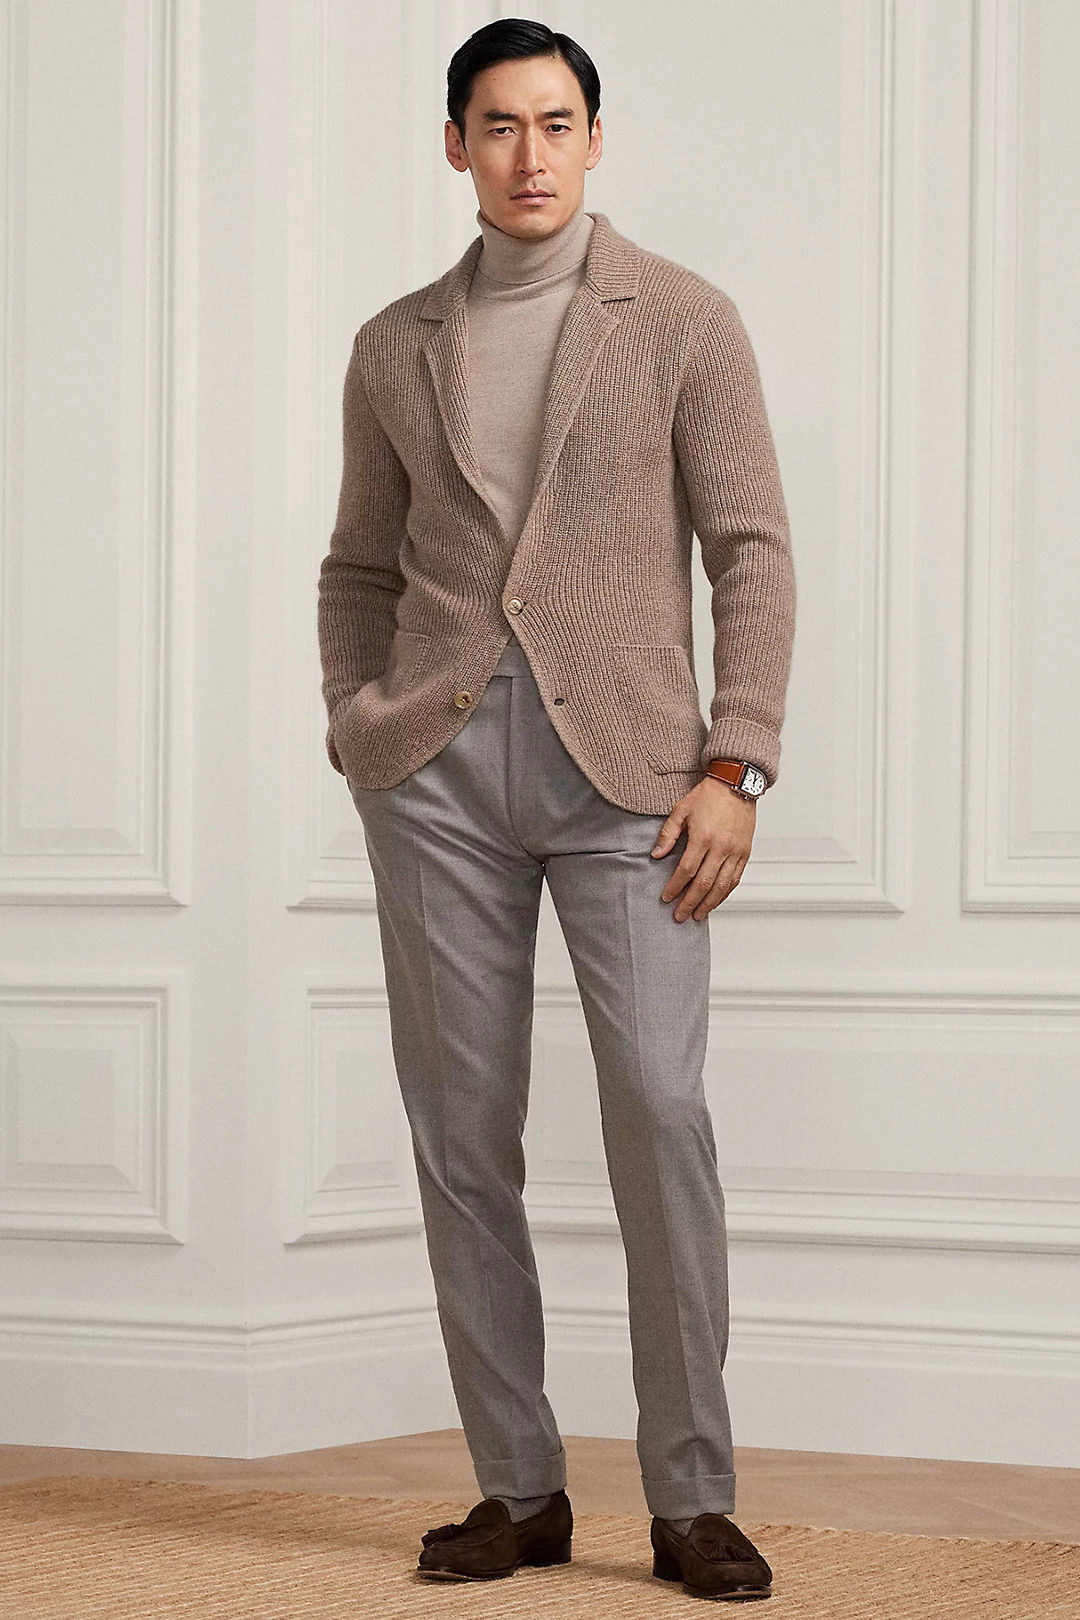 Brown cardigan, light brown turtleneck, gray dress pants, and brown loafers outfit